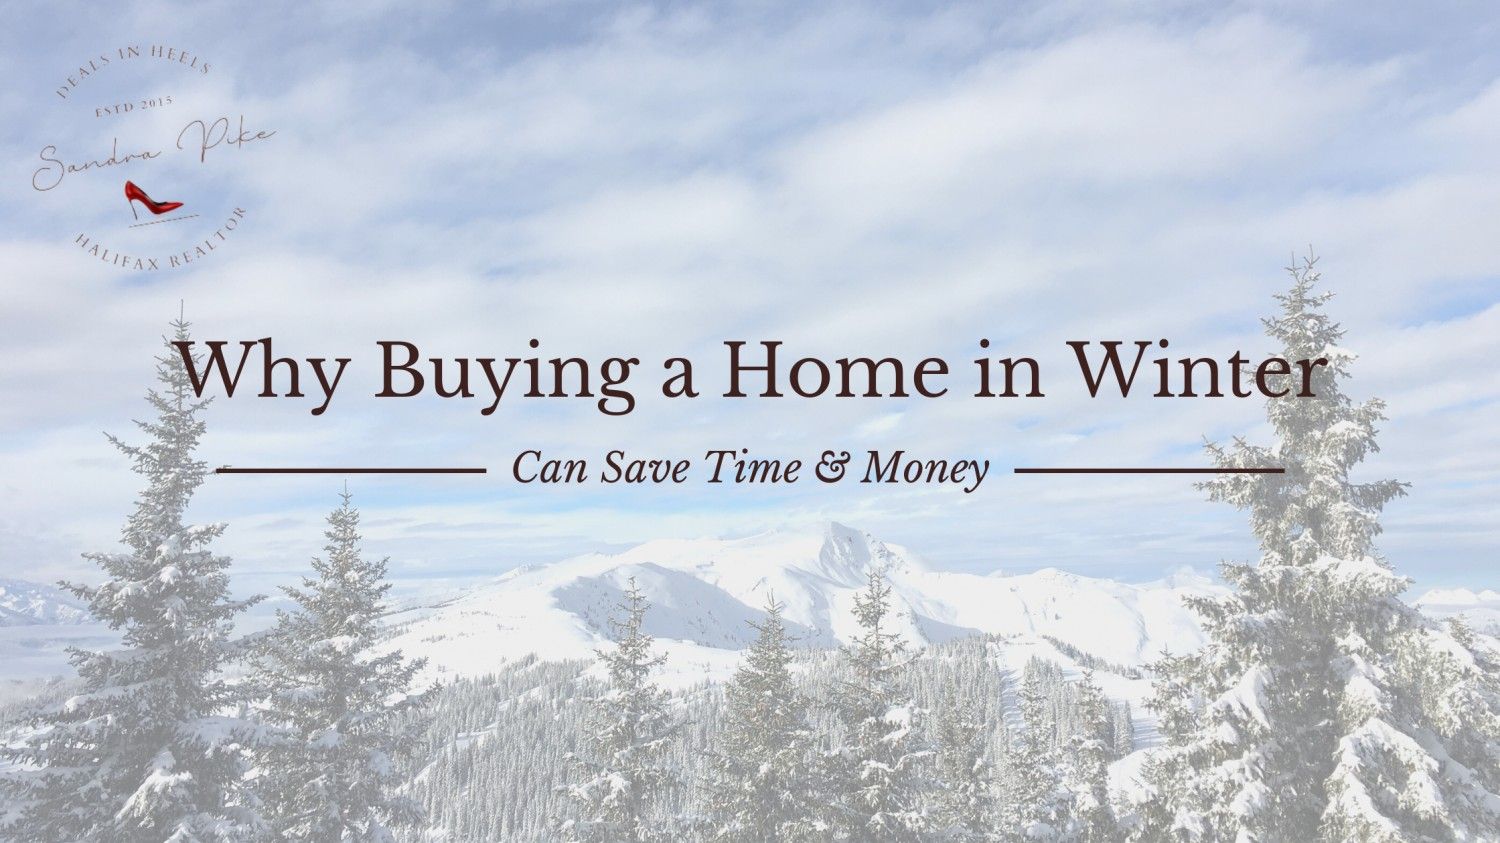 How can buying a home in winter save time and money?